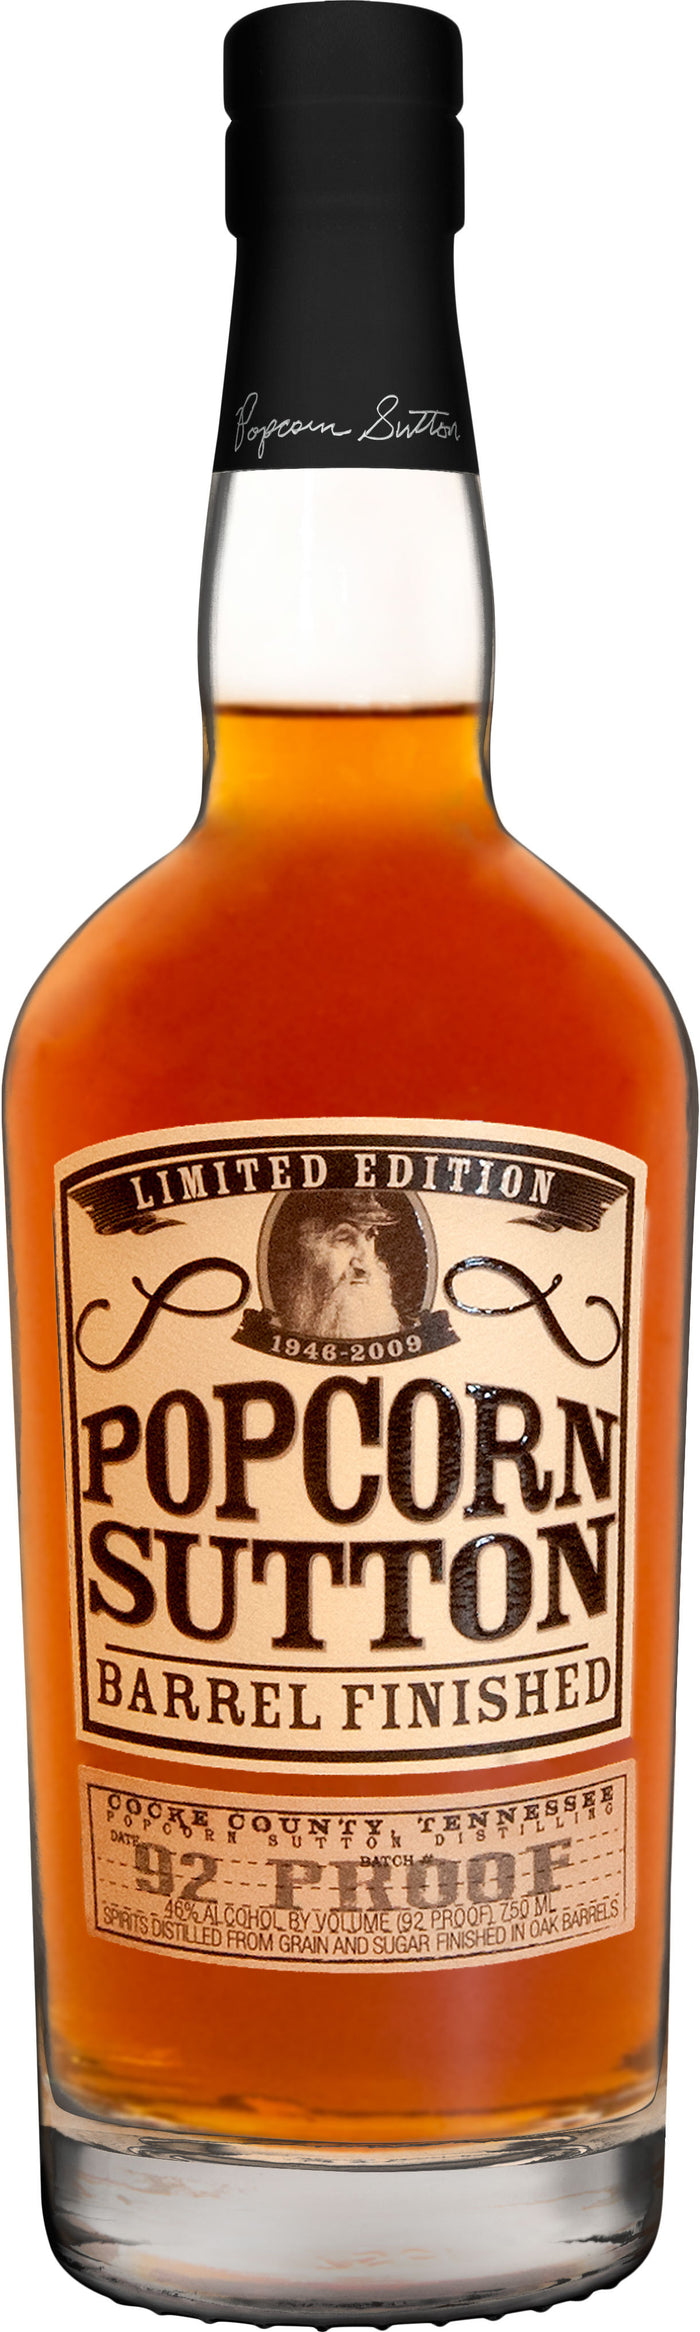 Popcorn Sutton Limited Edition Barrel Finished Whiskey